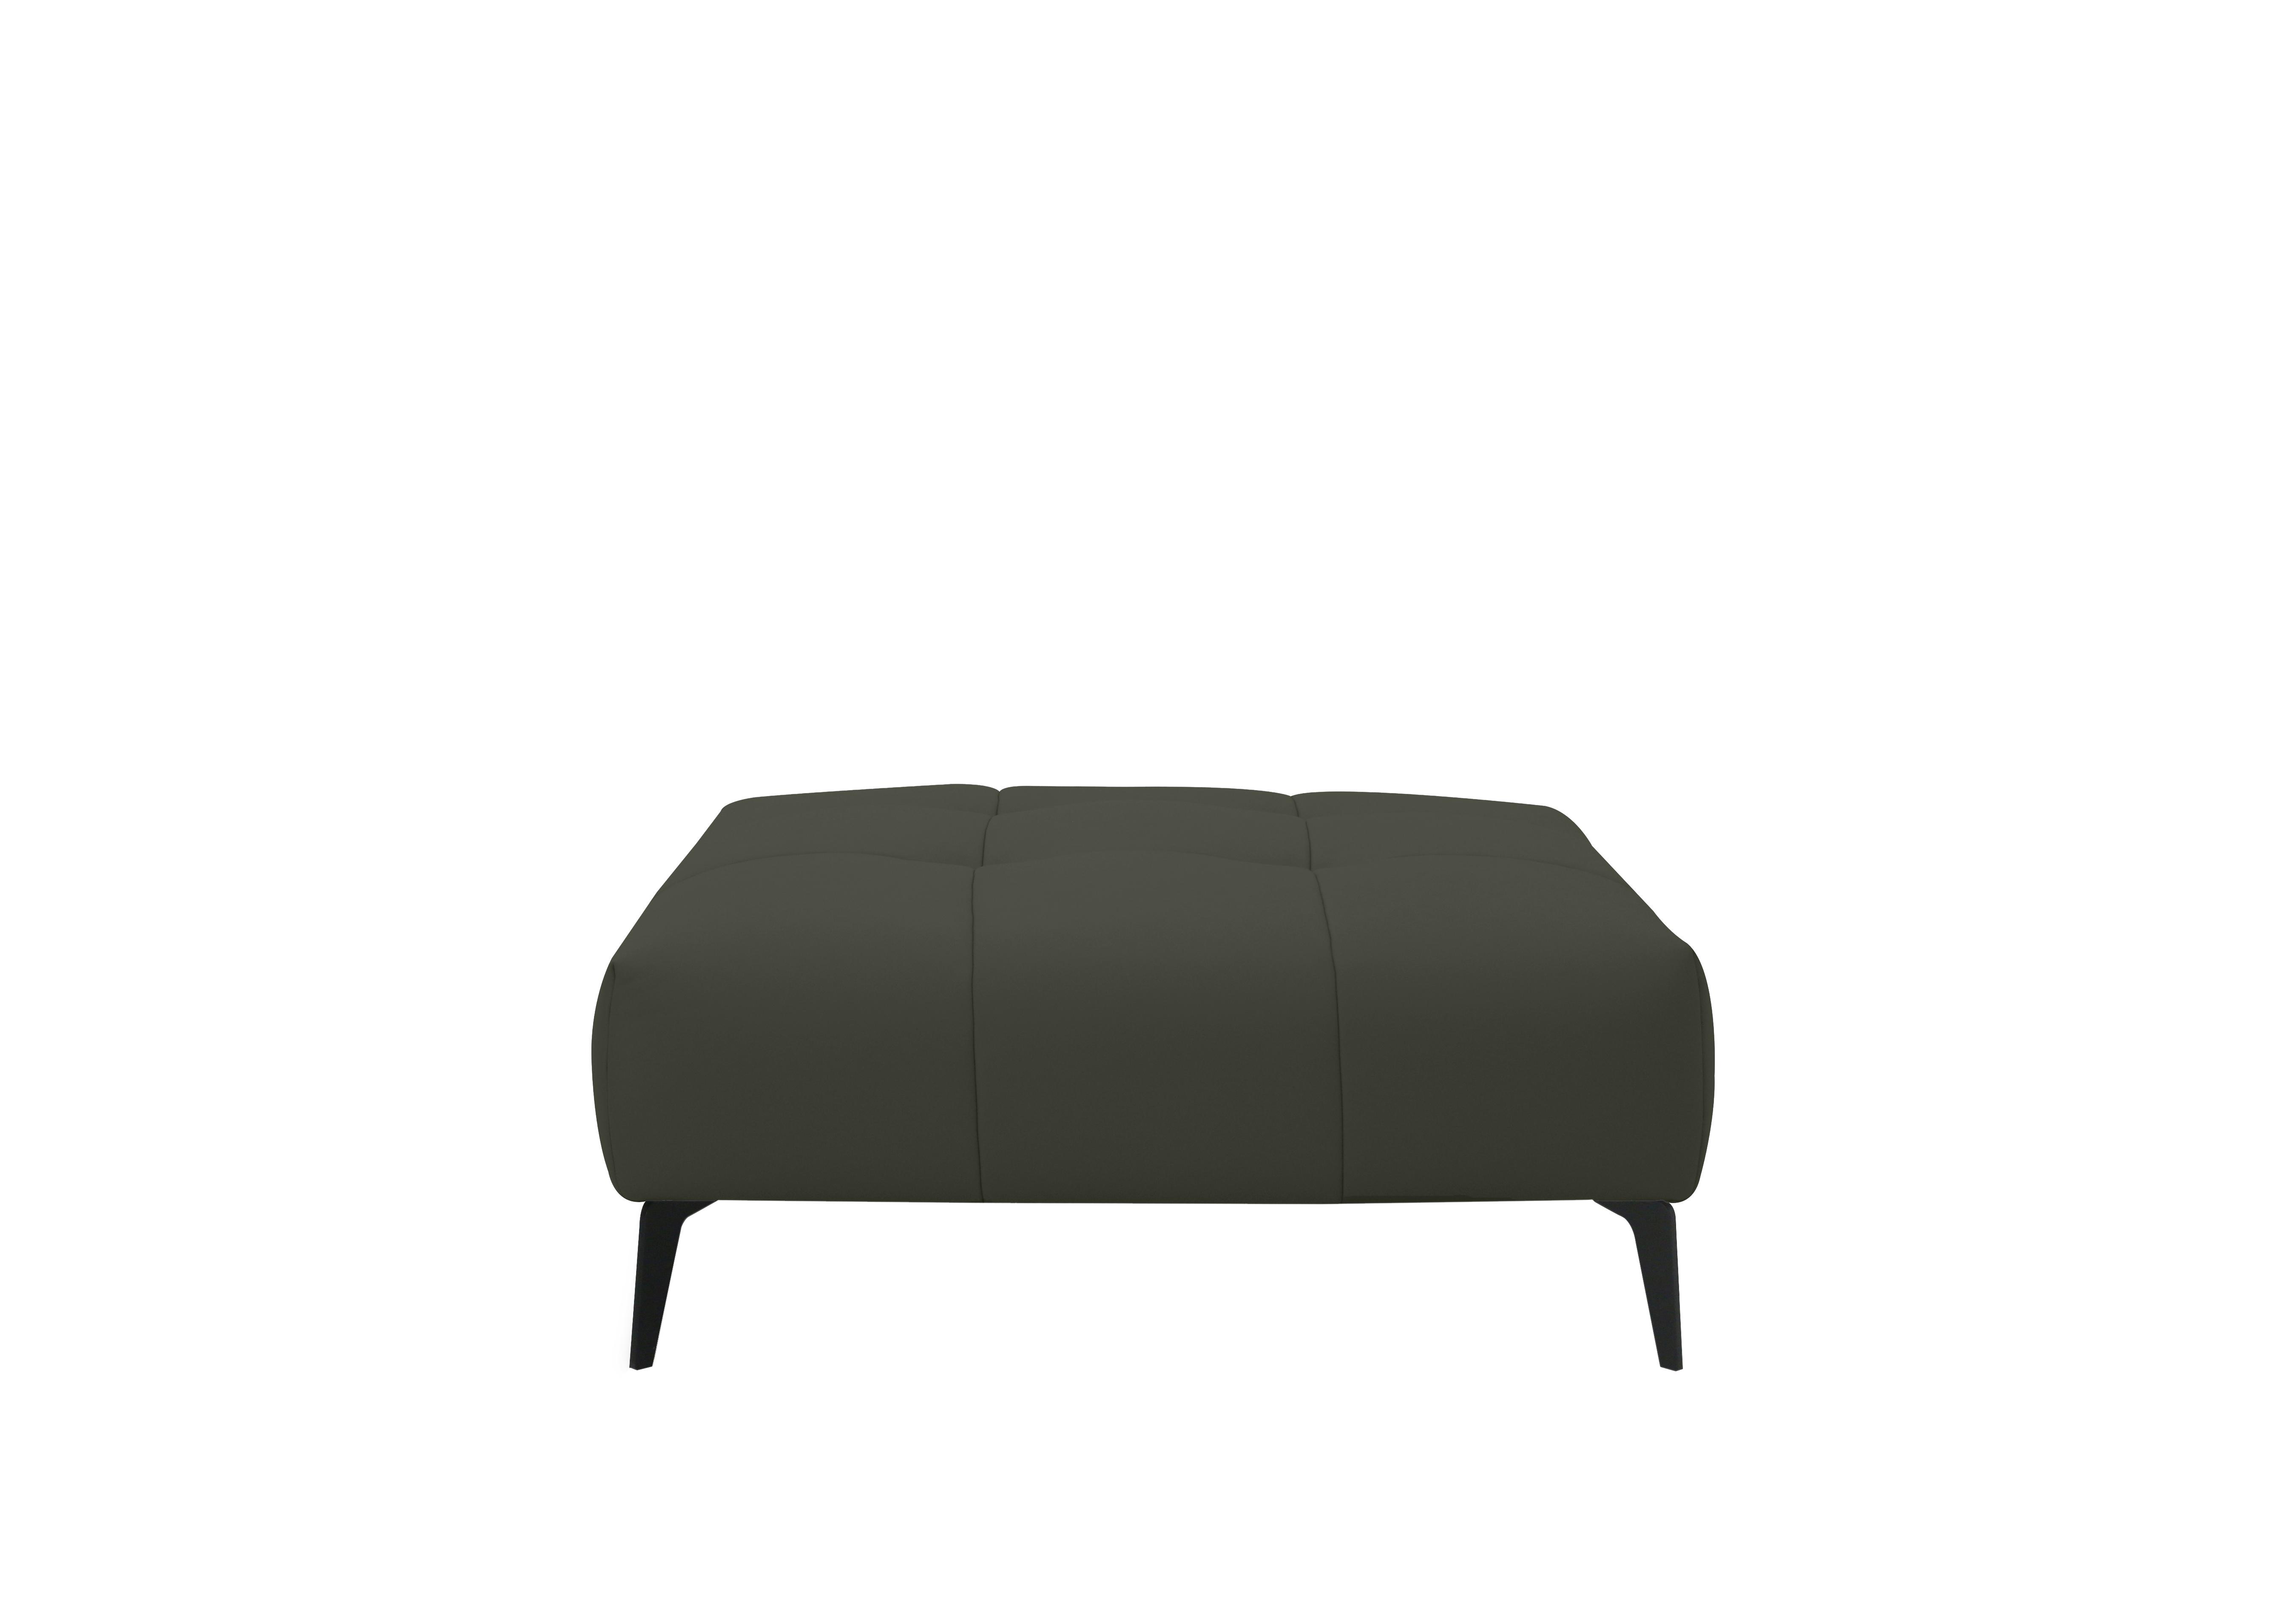 Lawson Leather Footstool in Np-548e Dark Olive on Furniture Village